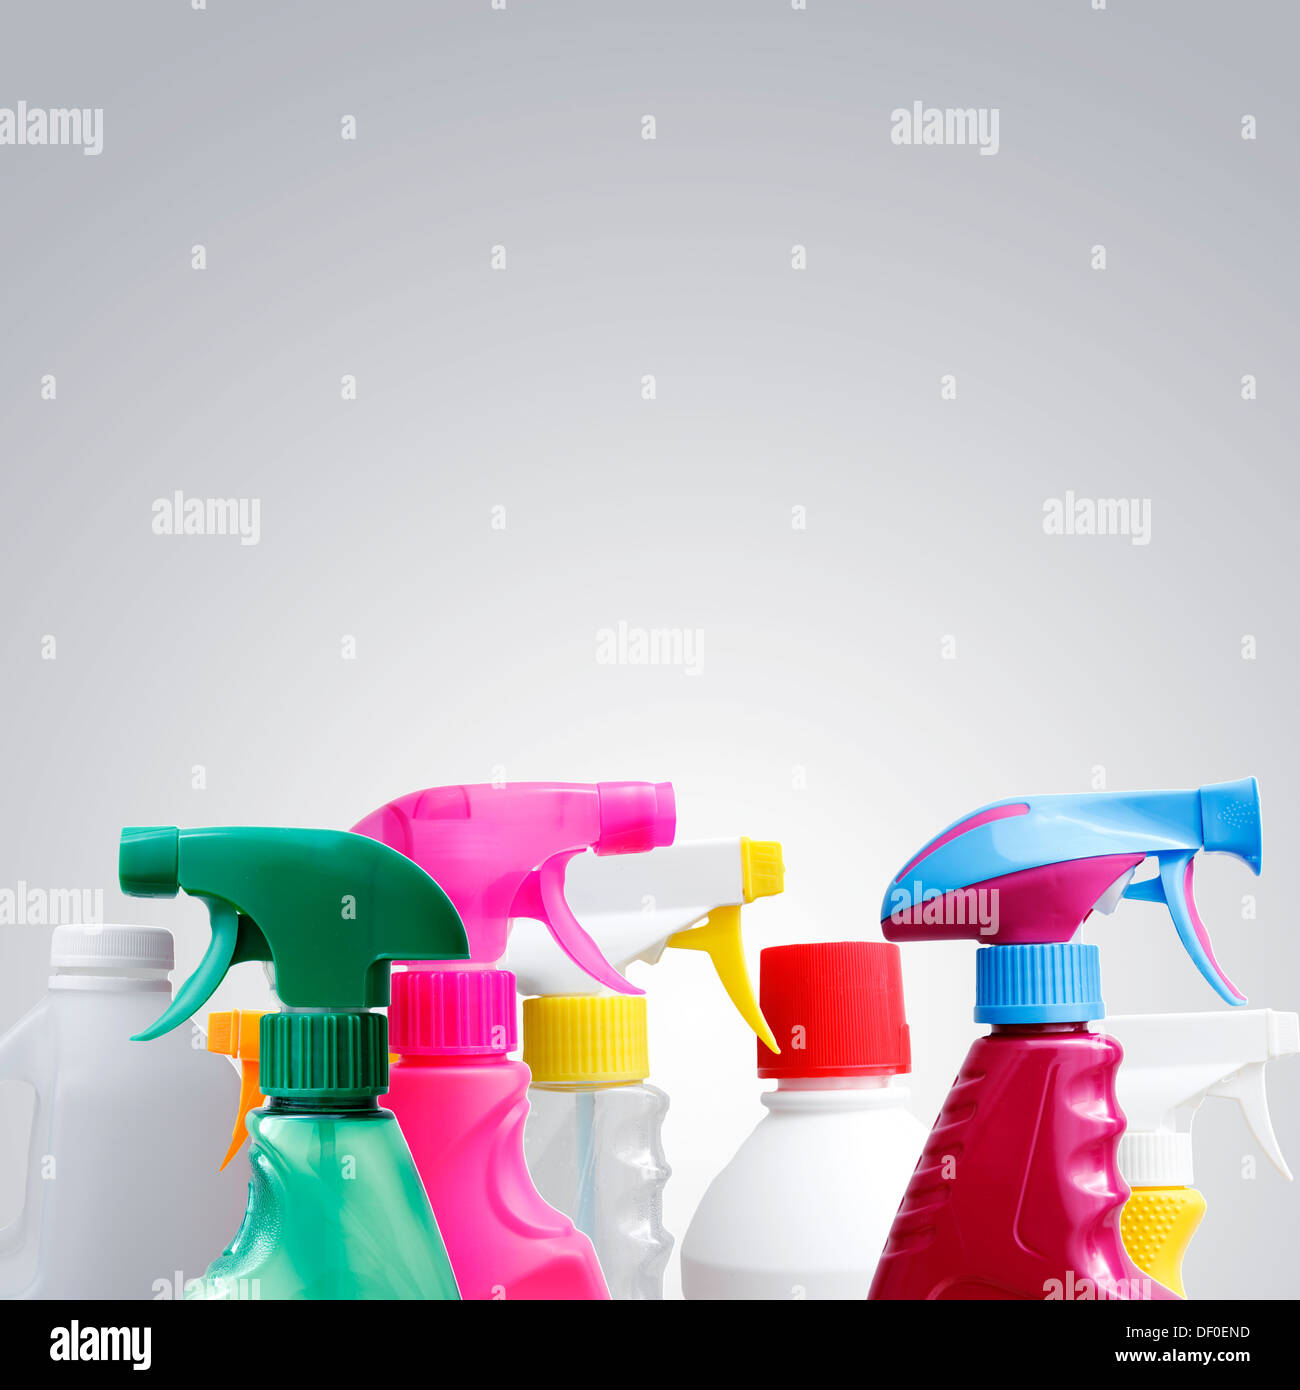 Cleaning bottles closeup. Grey background Stock Photo